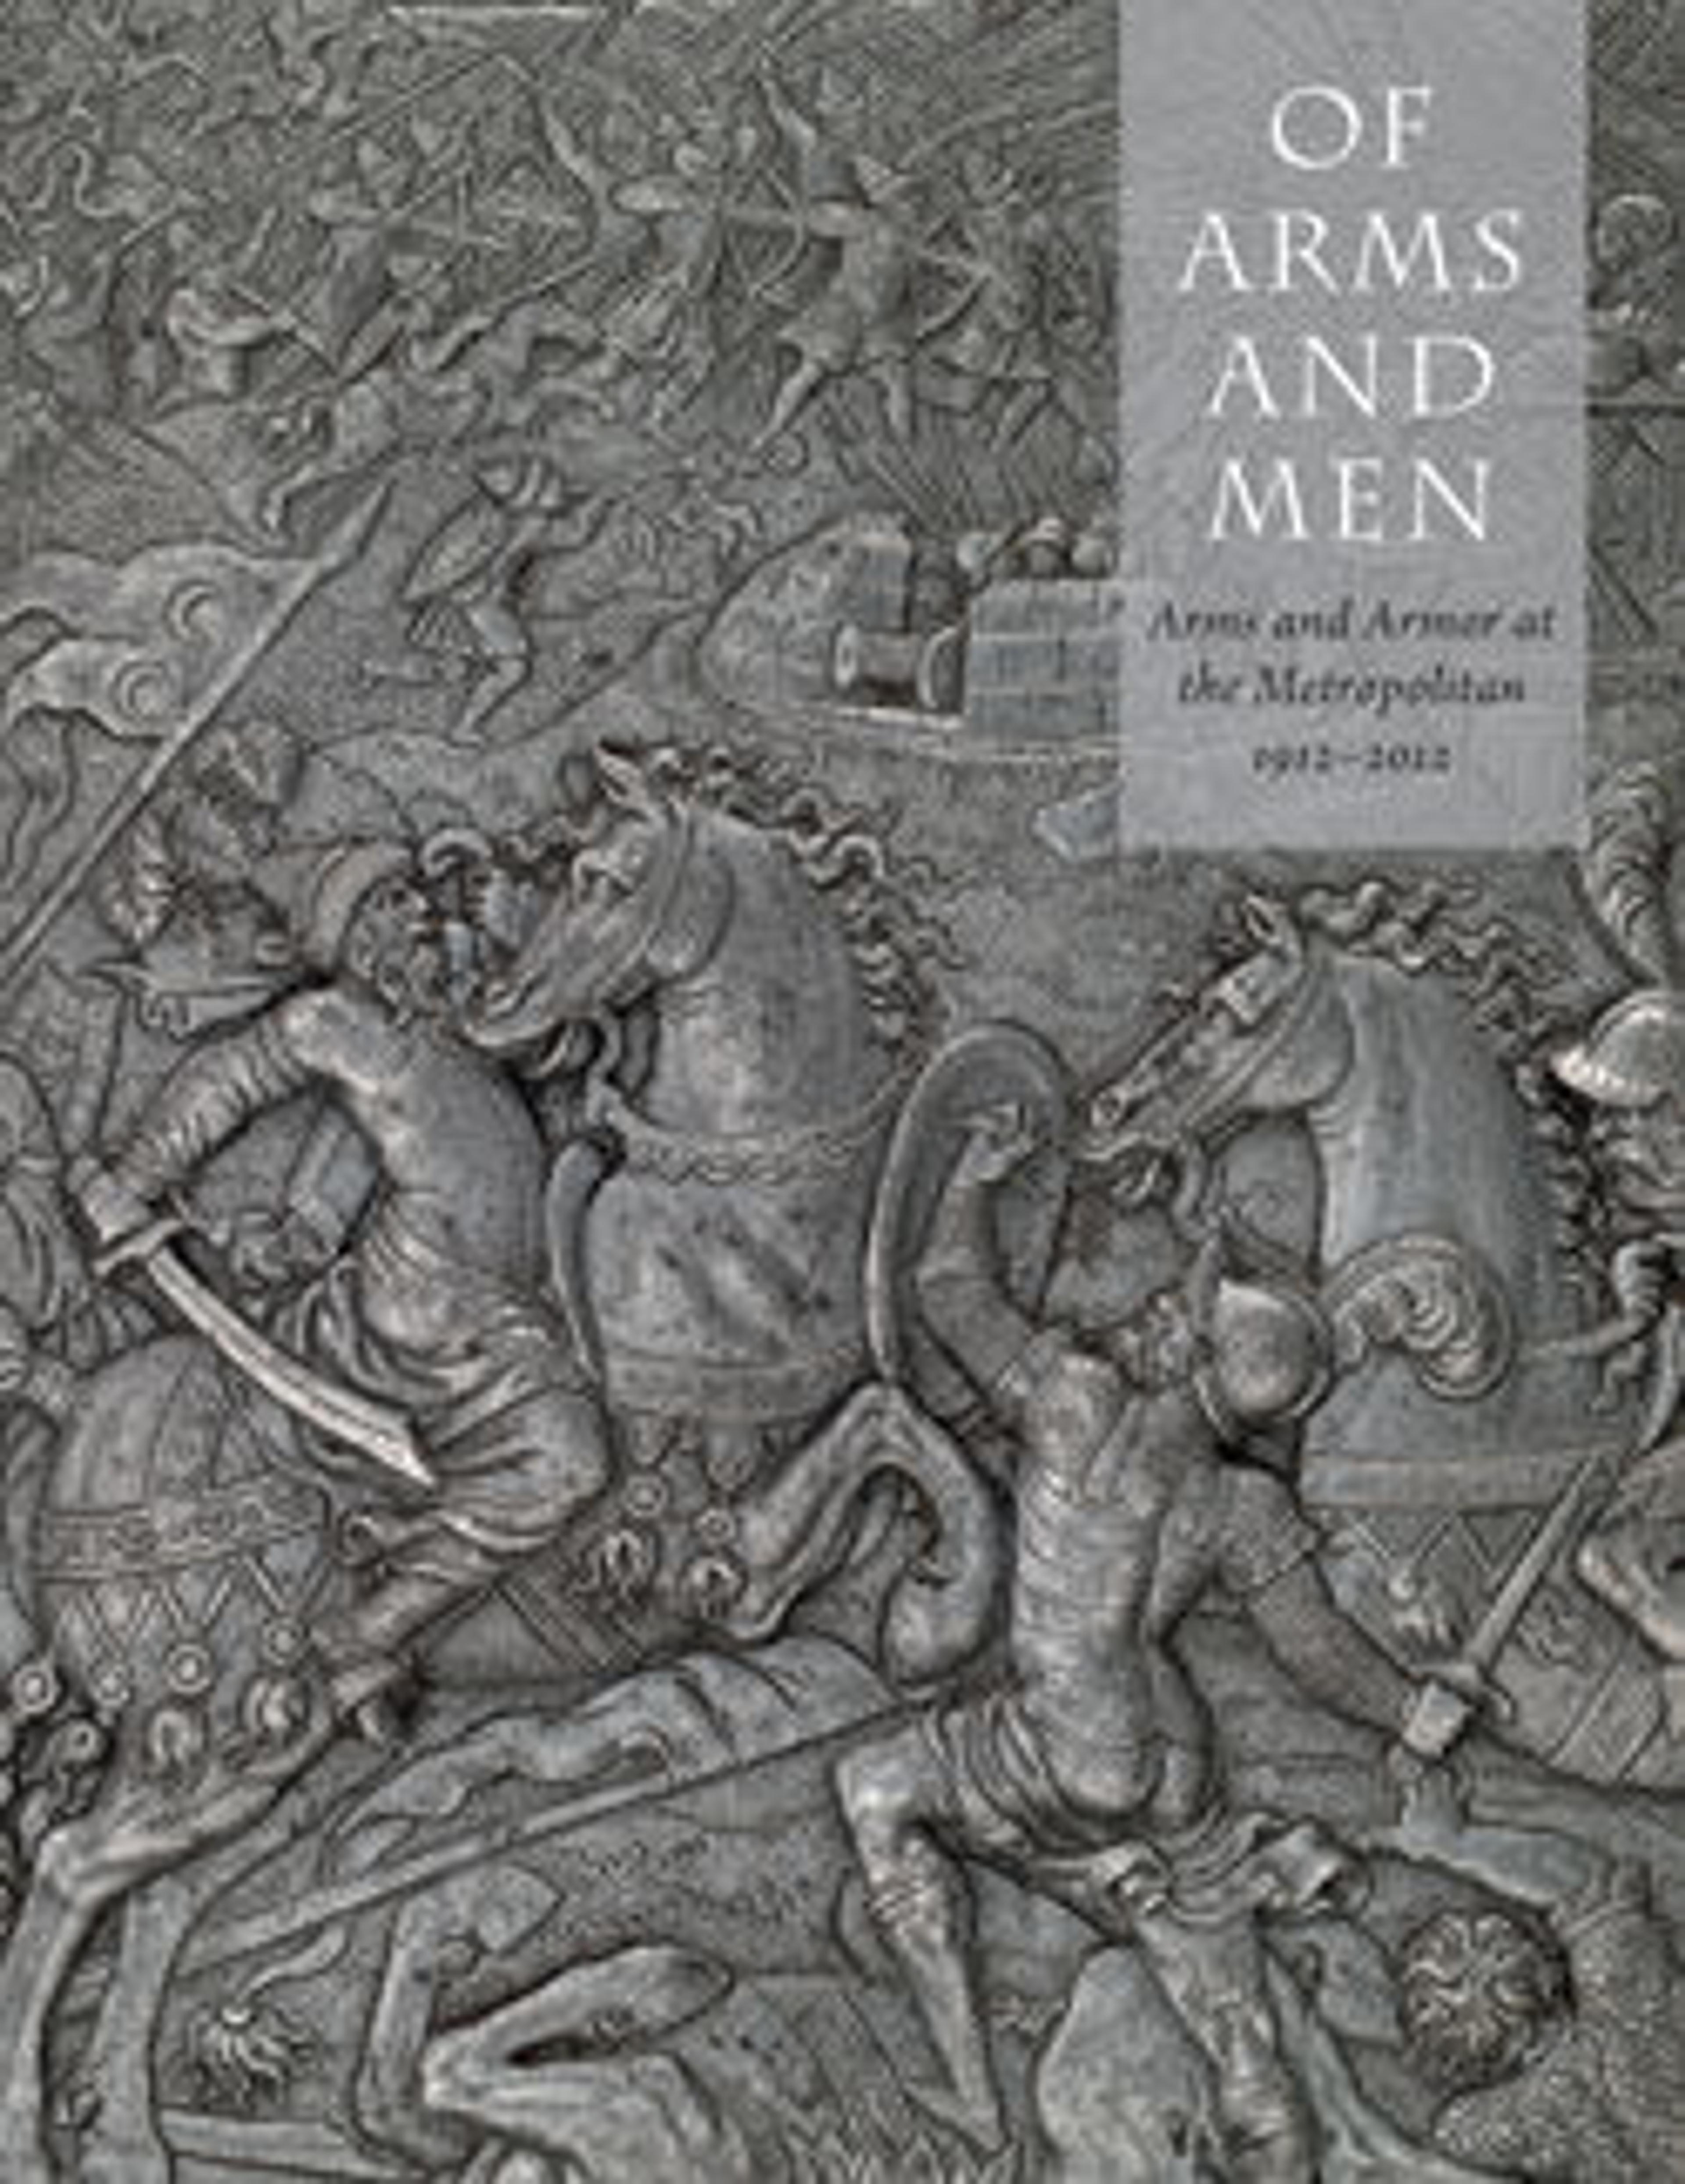 Of Arms and Men: Arms and Armor at the Metropolitan, 1912-2012